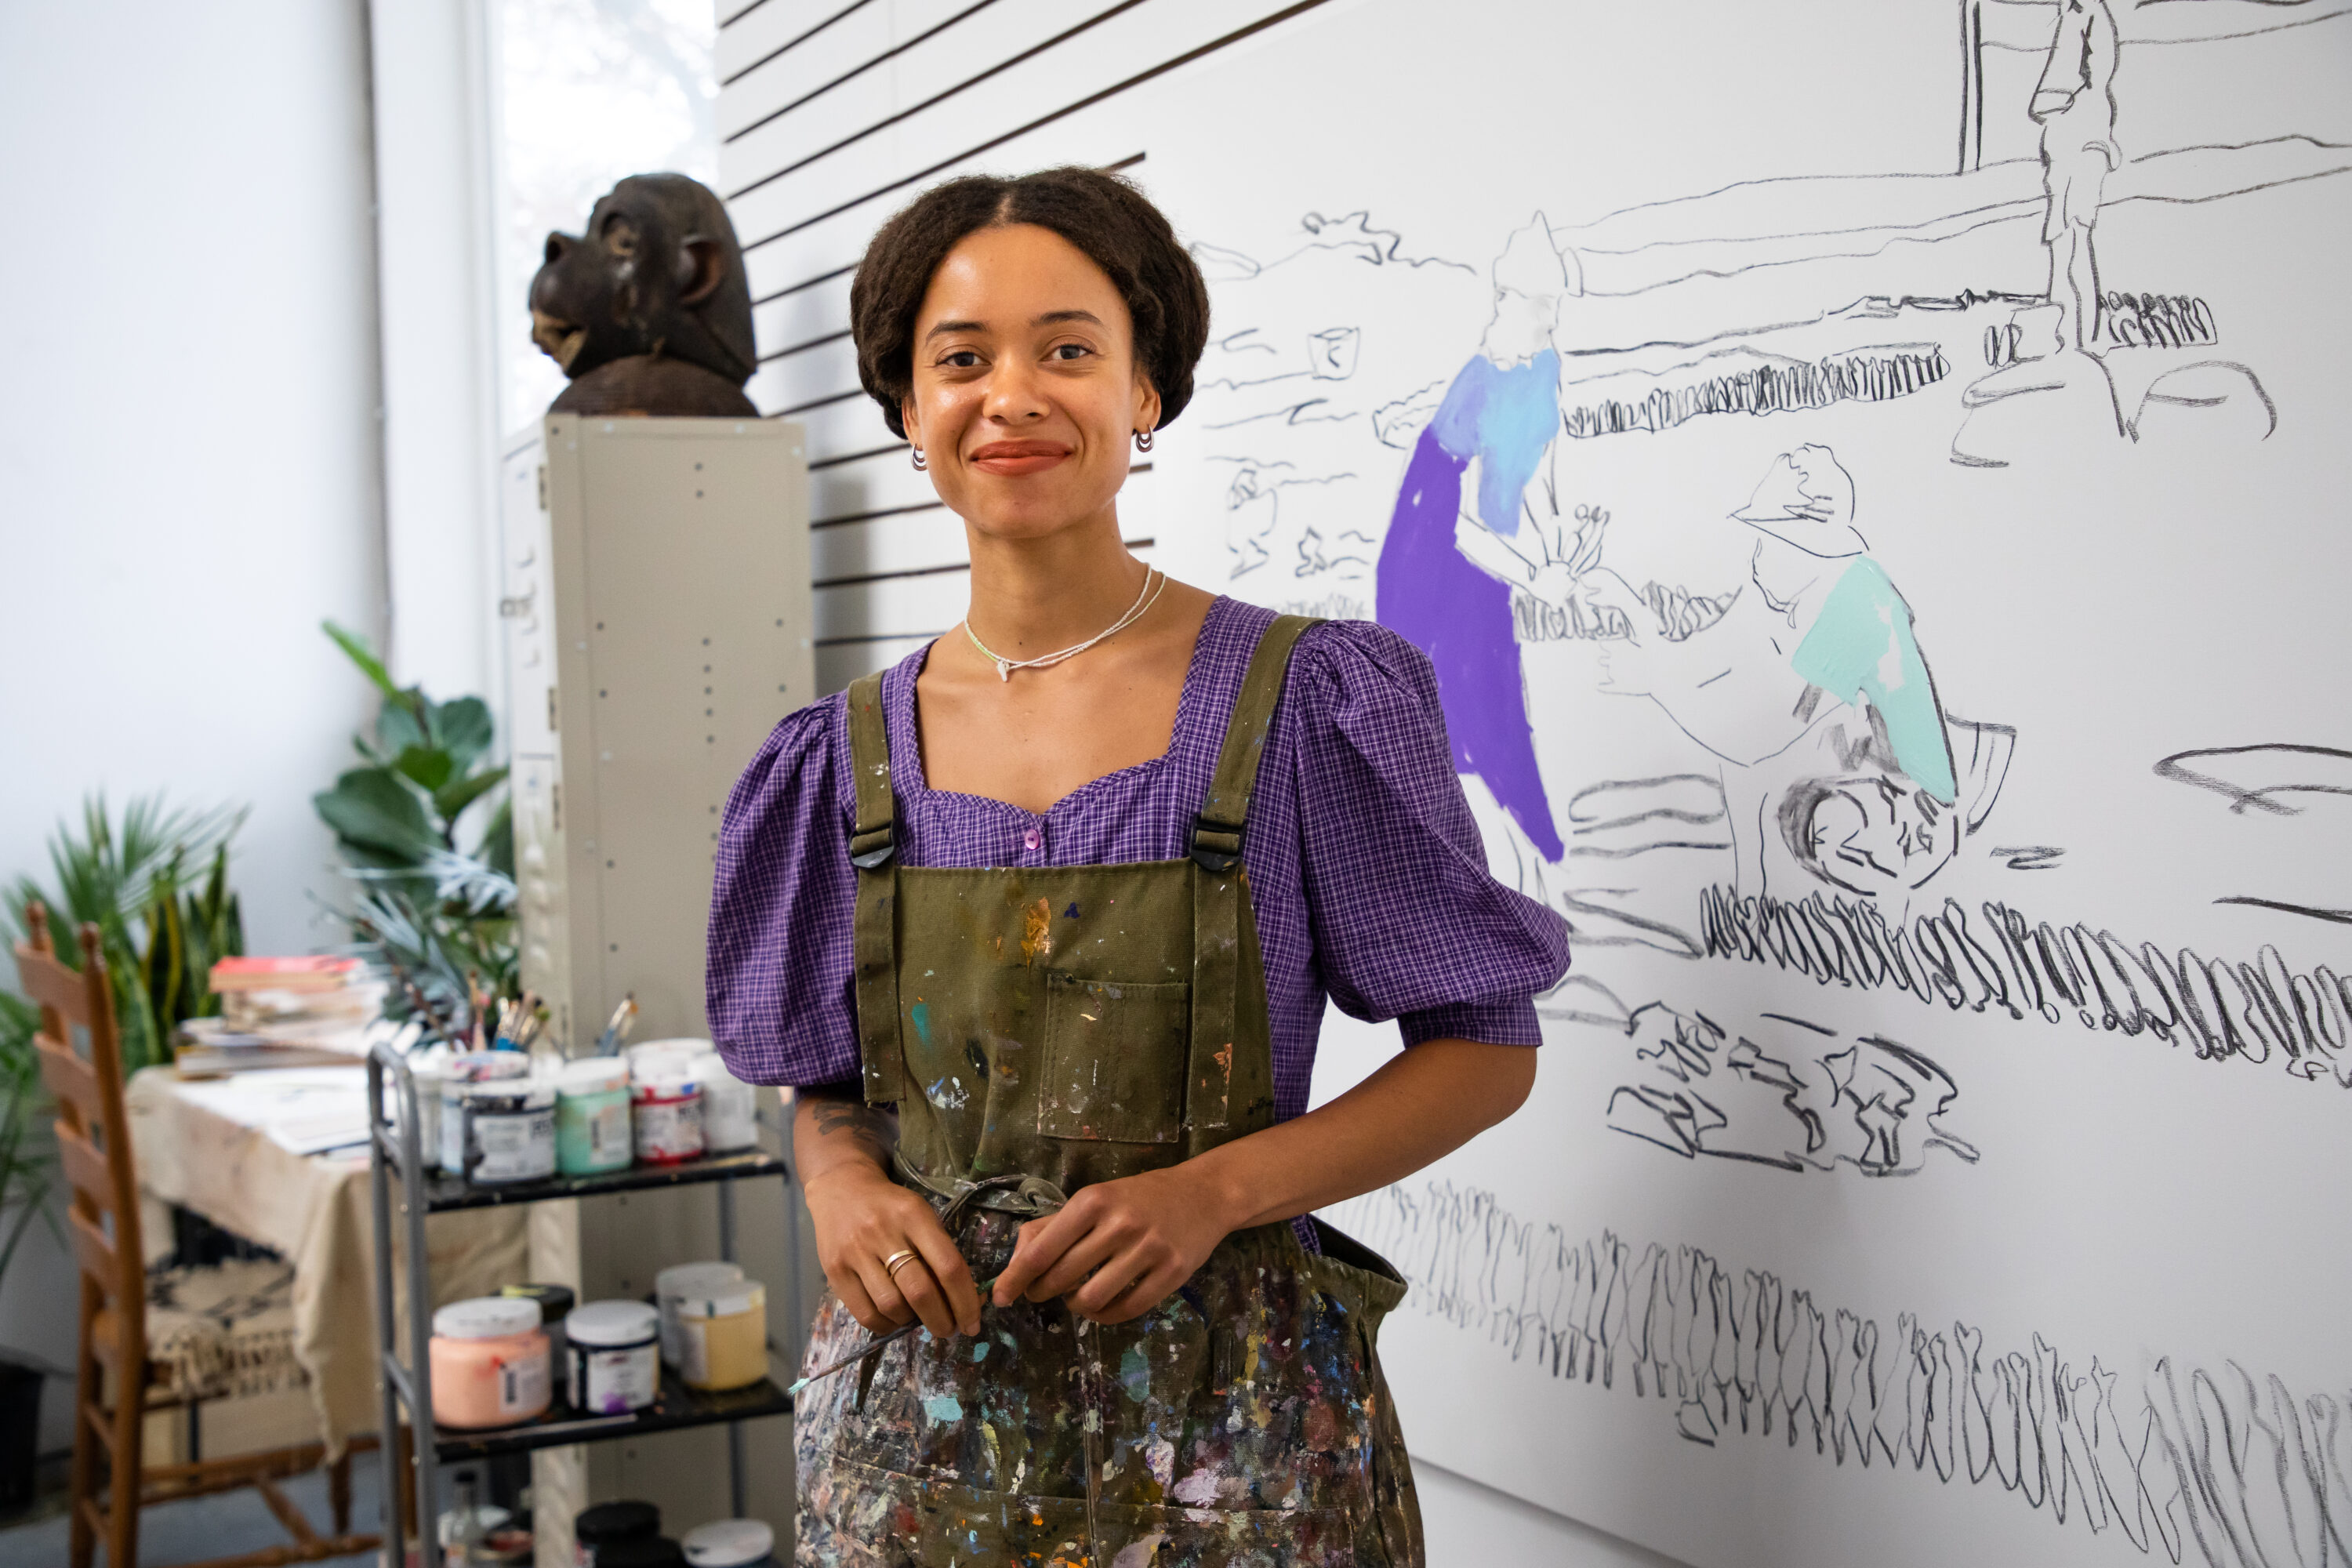 A medium-skinned woman with brown hair that is parted in the middle and pulled back, stands in an artist studio wearing a short-sleeved purple blouse and olive green overalls covered in paint. Behind her is an unfinished painting of three figures outlined in black with highlights of purple, blue and green.